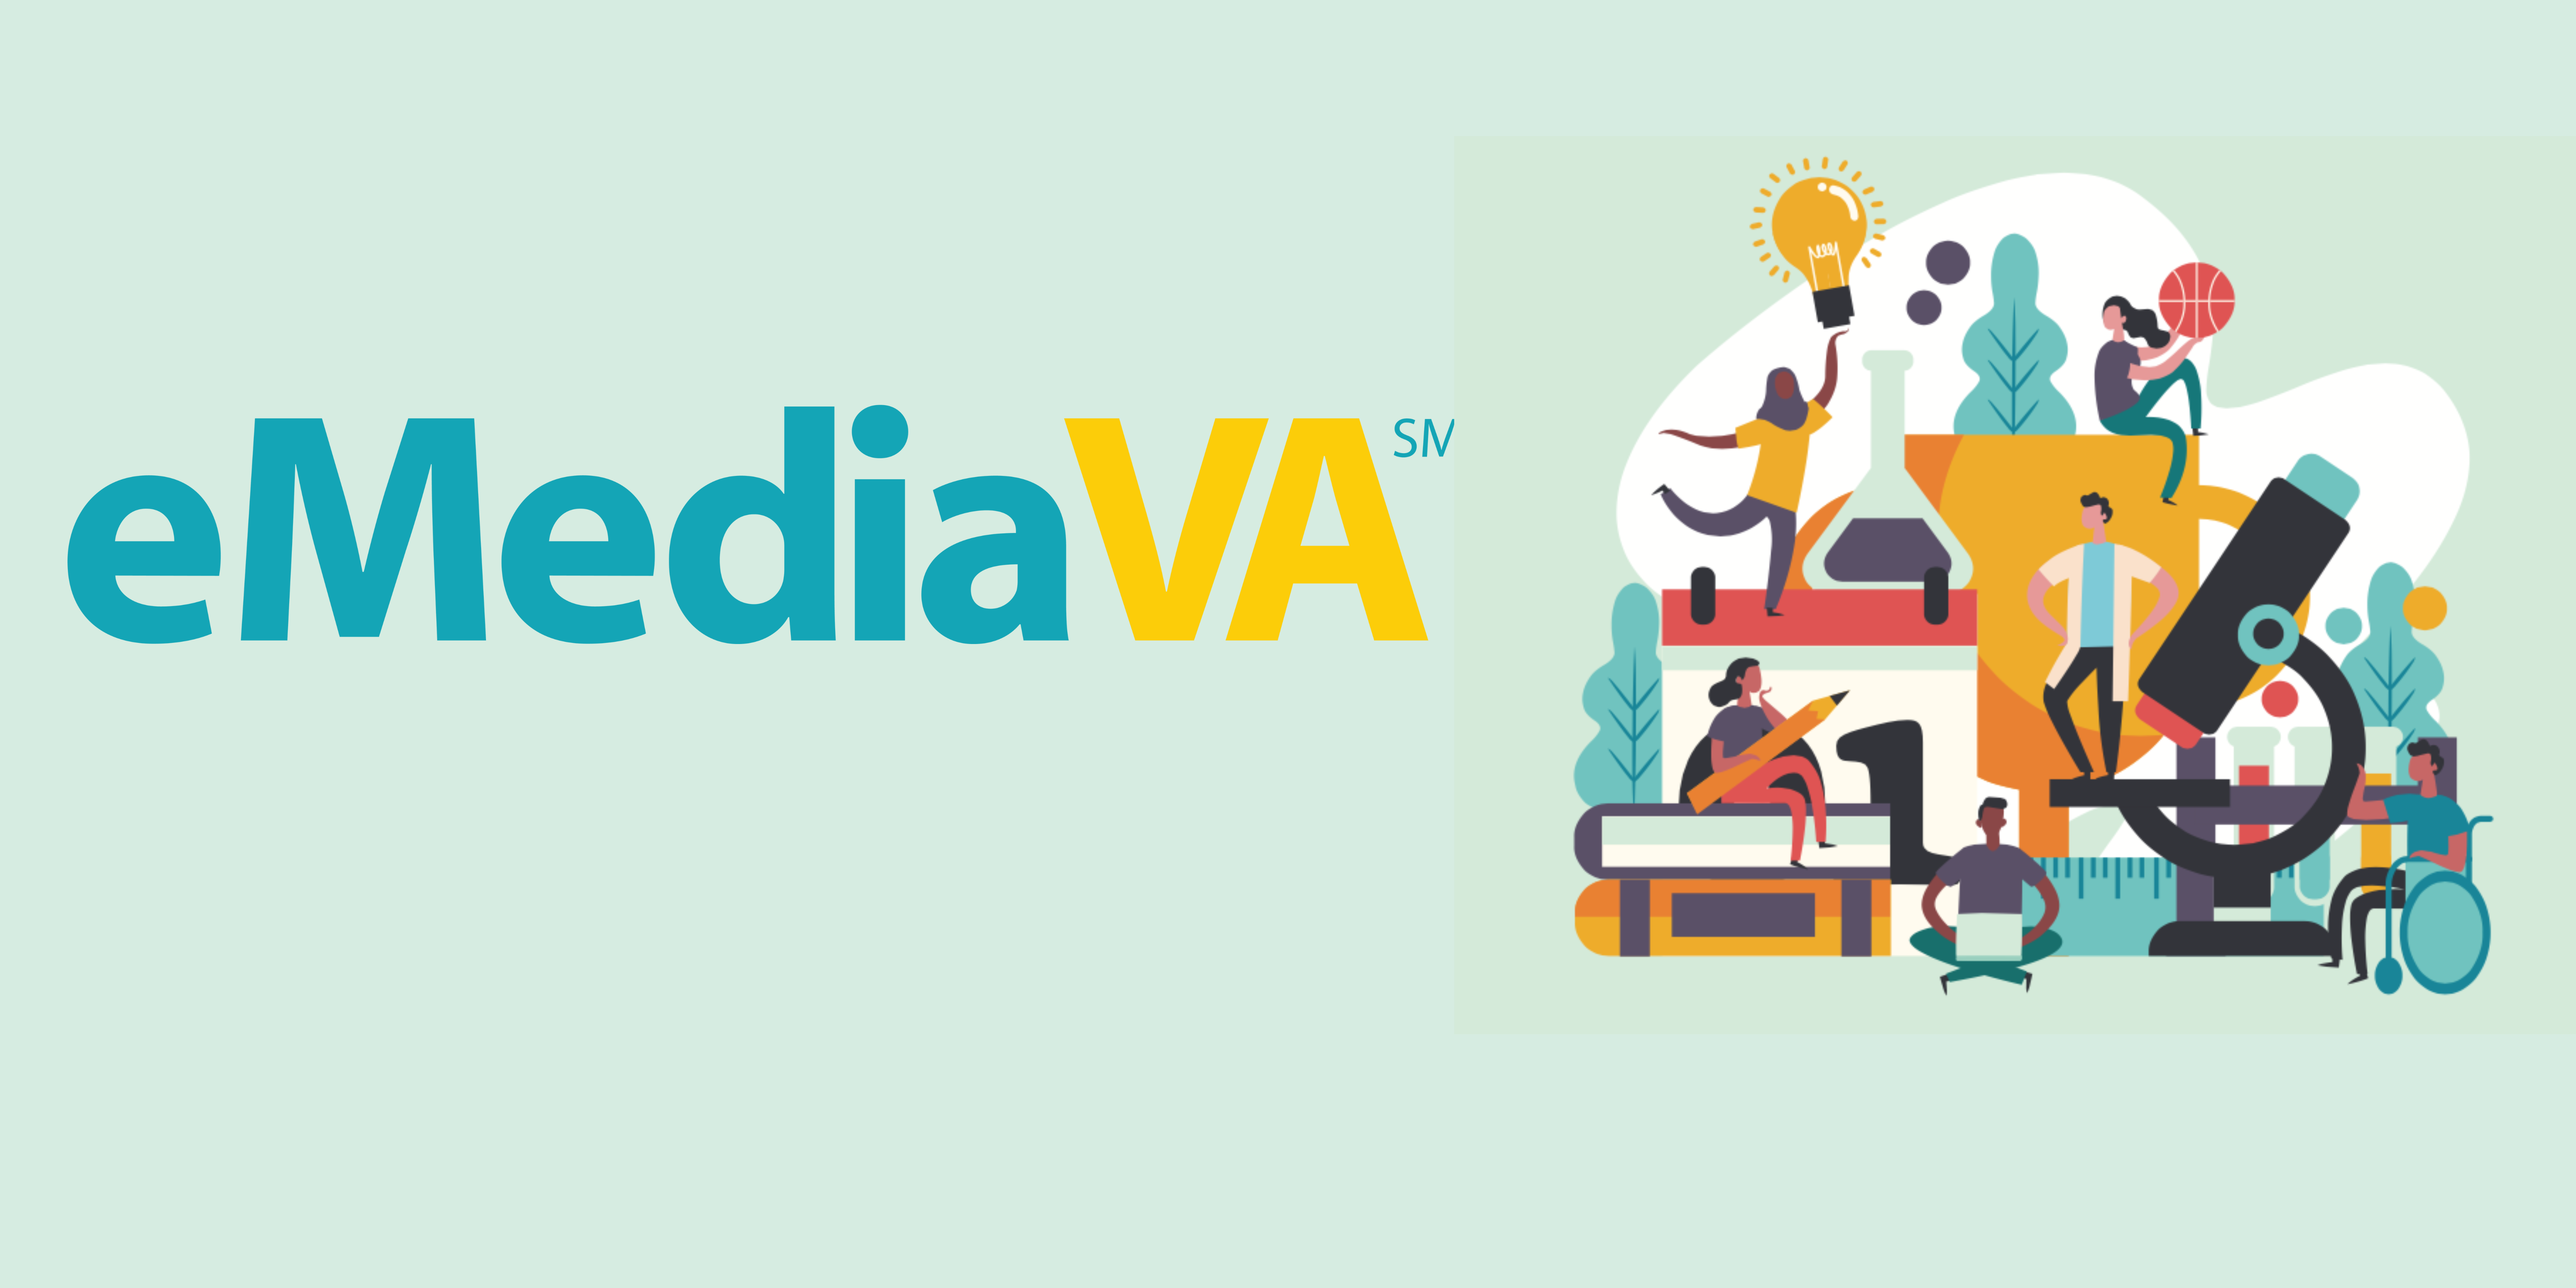 Social Studies Collections & Resources in eMediaVA